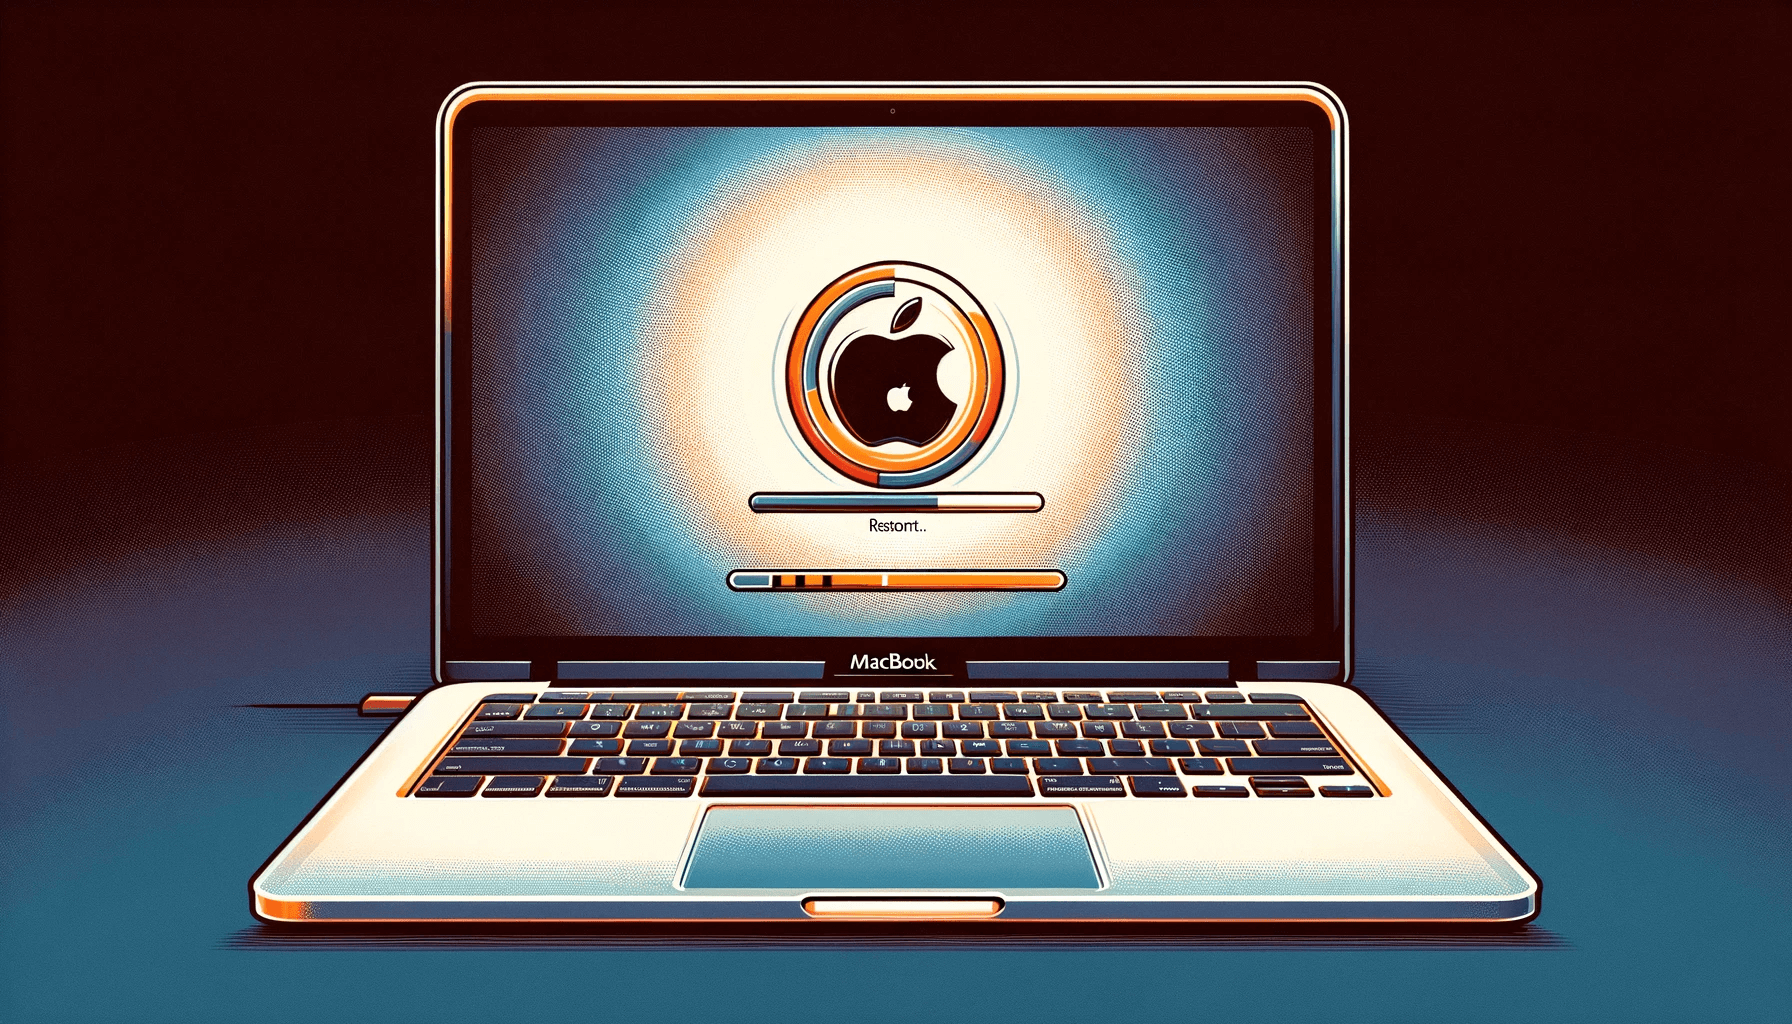 DALL·E 2023 11 29 11.10.31 A digital illustration of a MacBook restarting. The MacBook is shown open on a desk with its screen displaying the restarting process. The screen sho